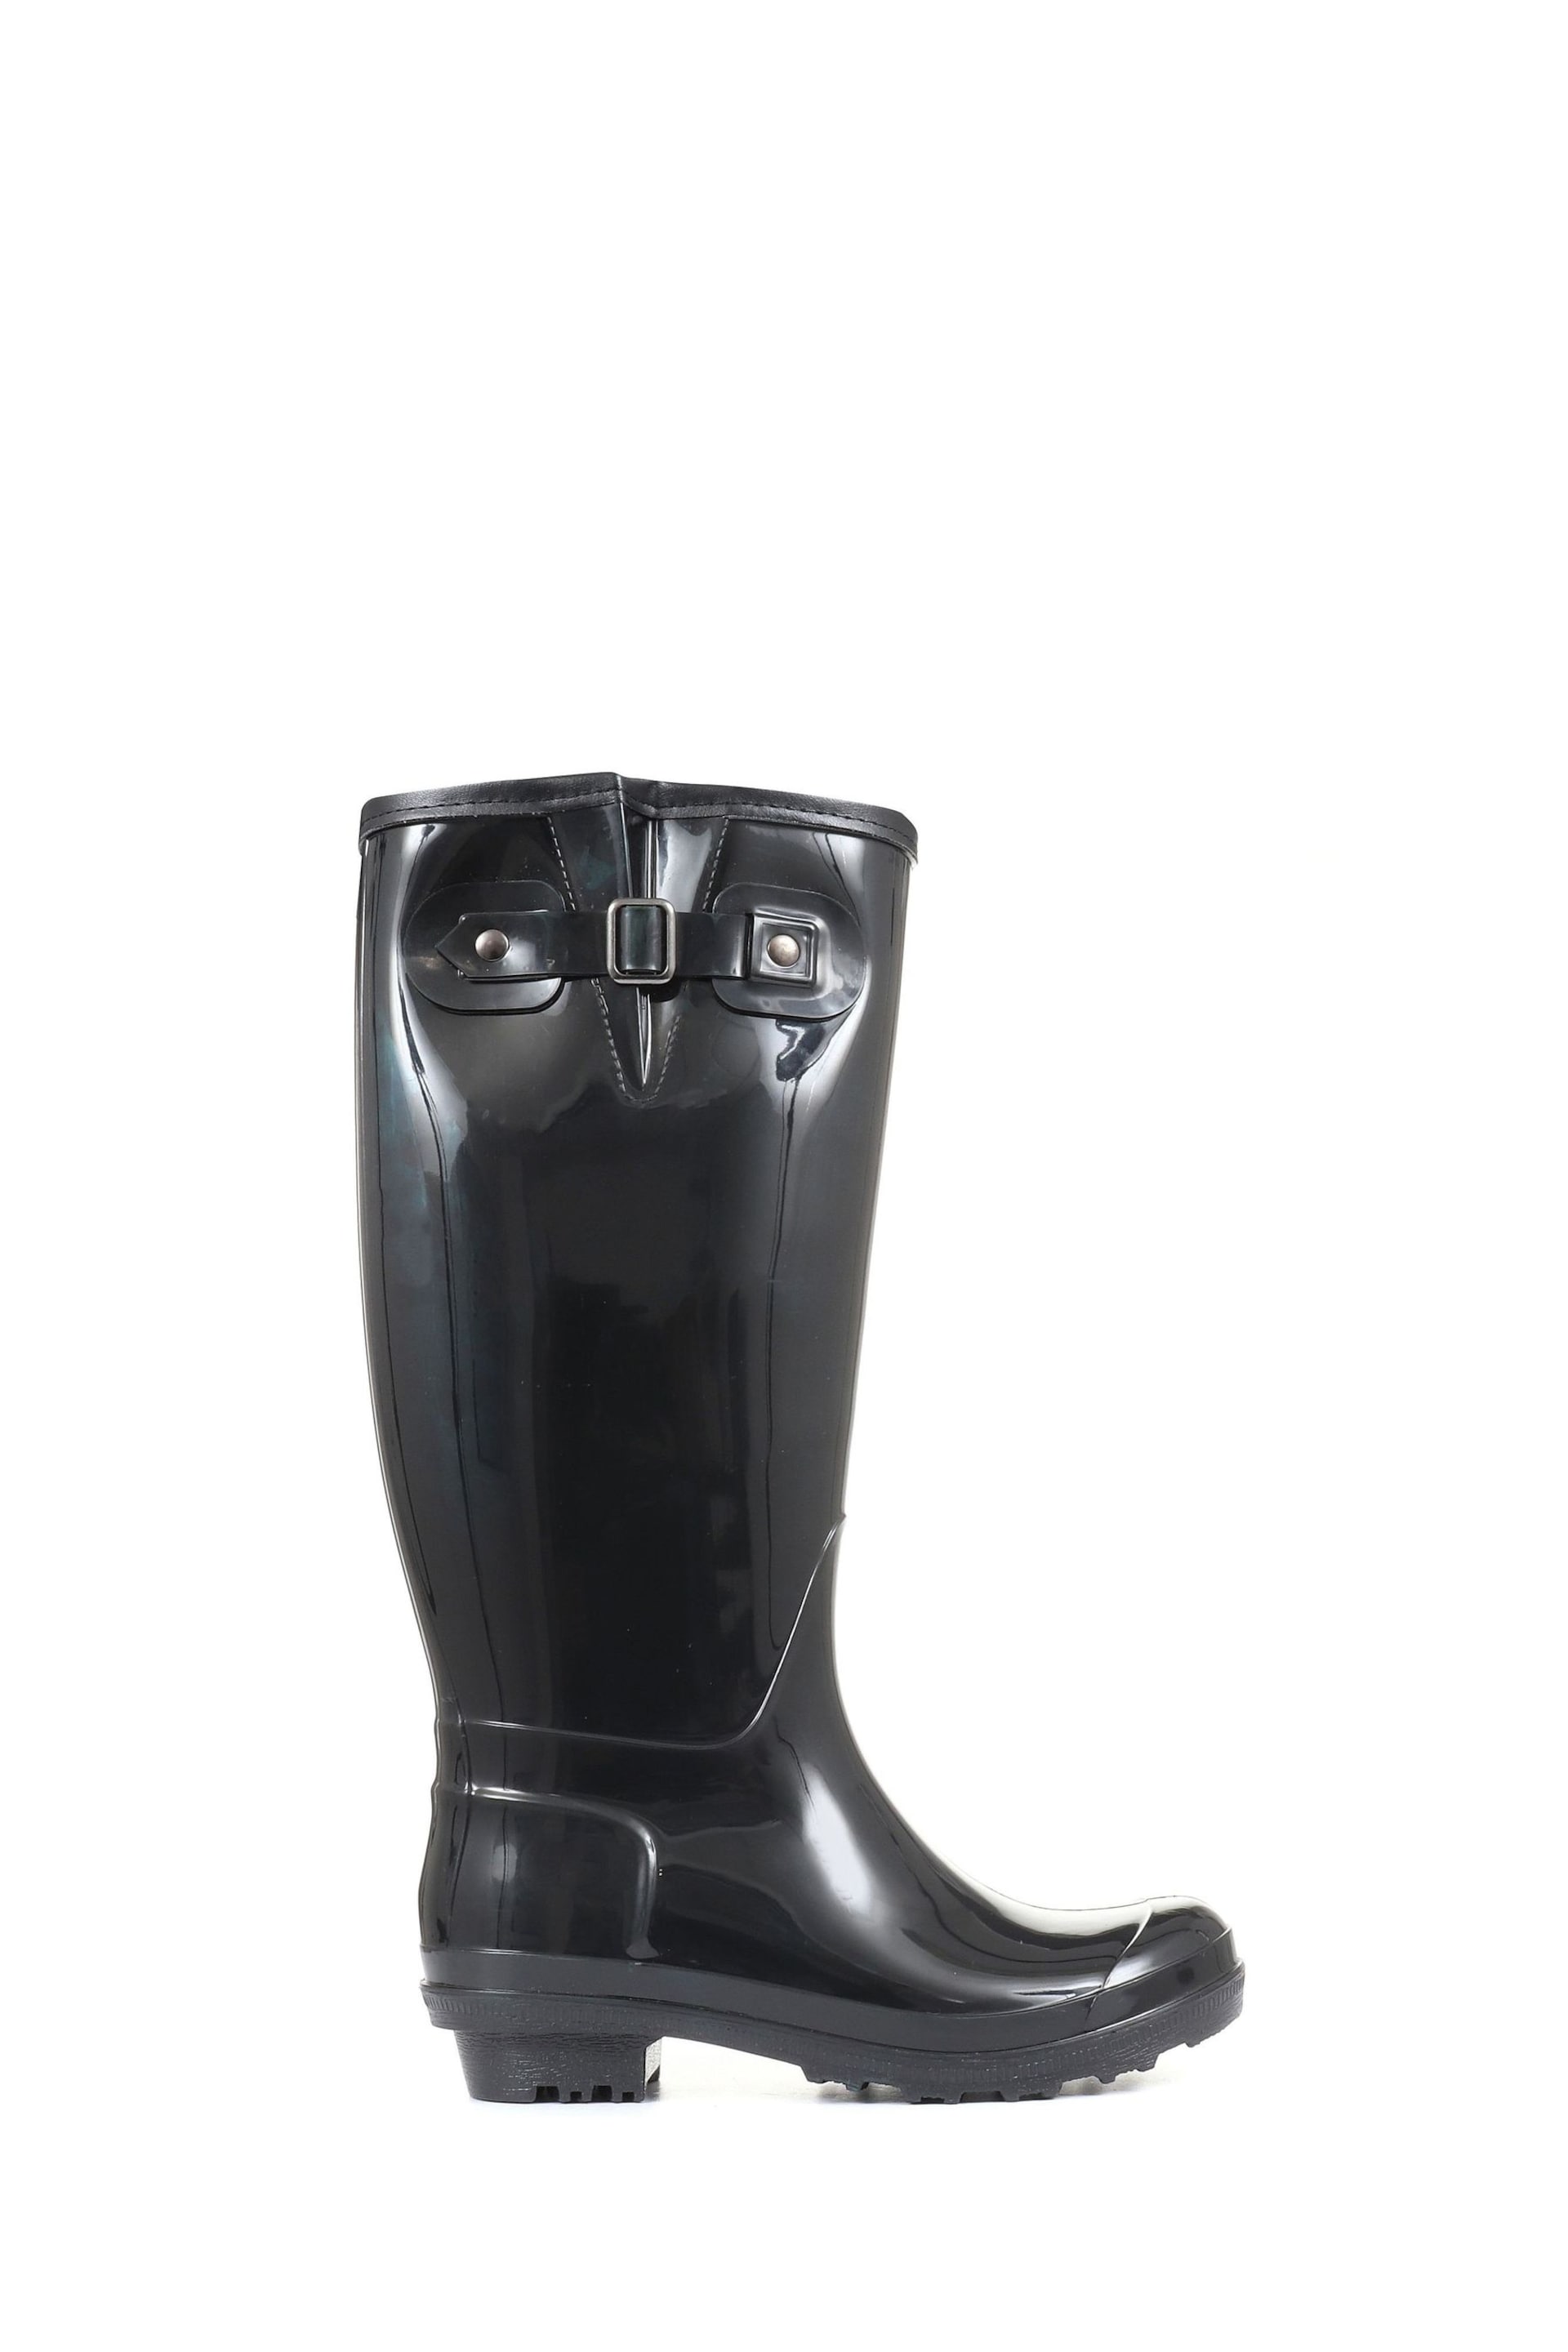 Pavers Ladies Patent Fleece Lined Wellies - Image 1 of 5